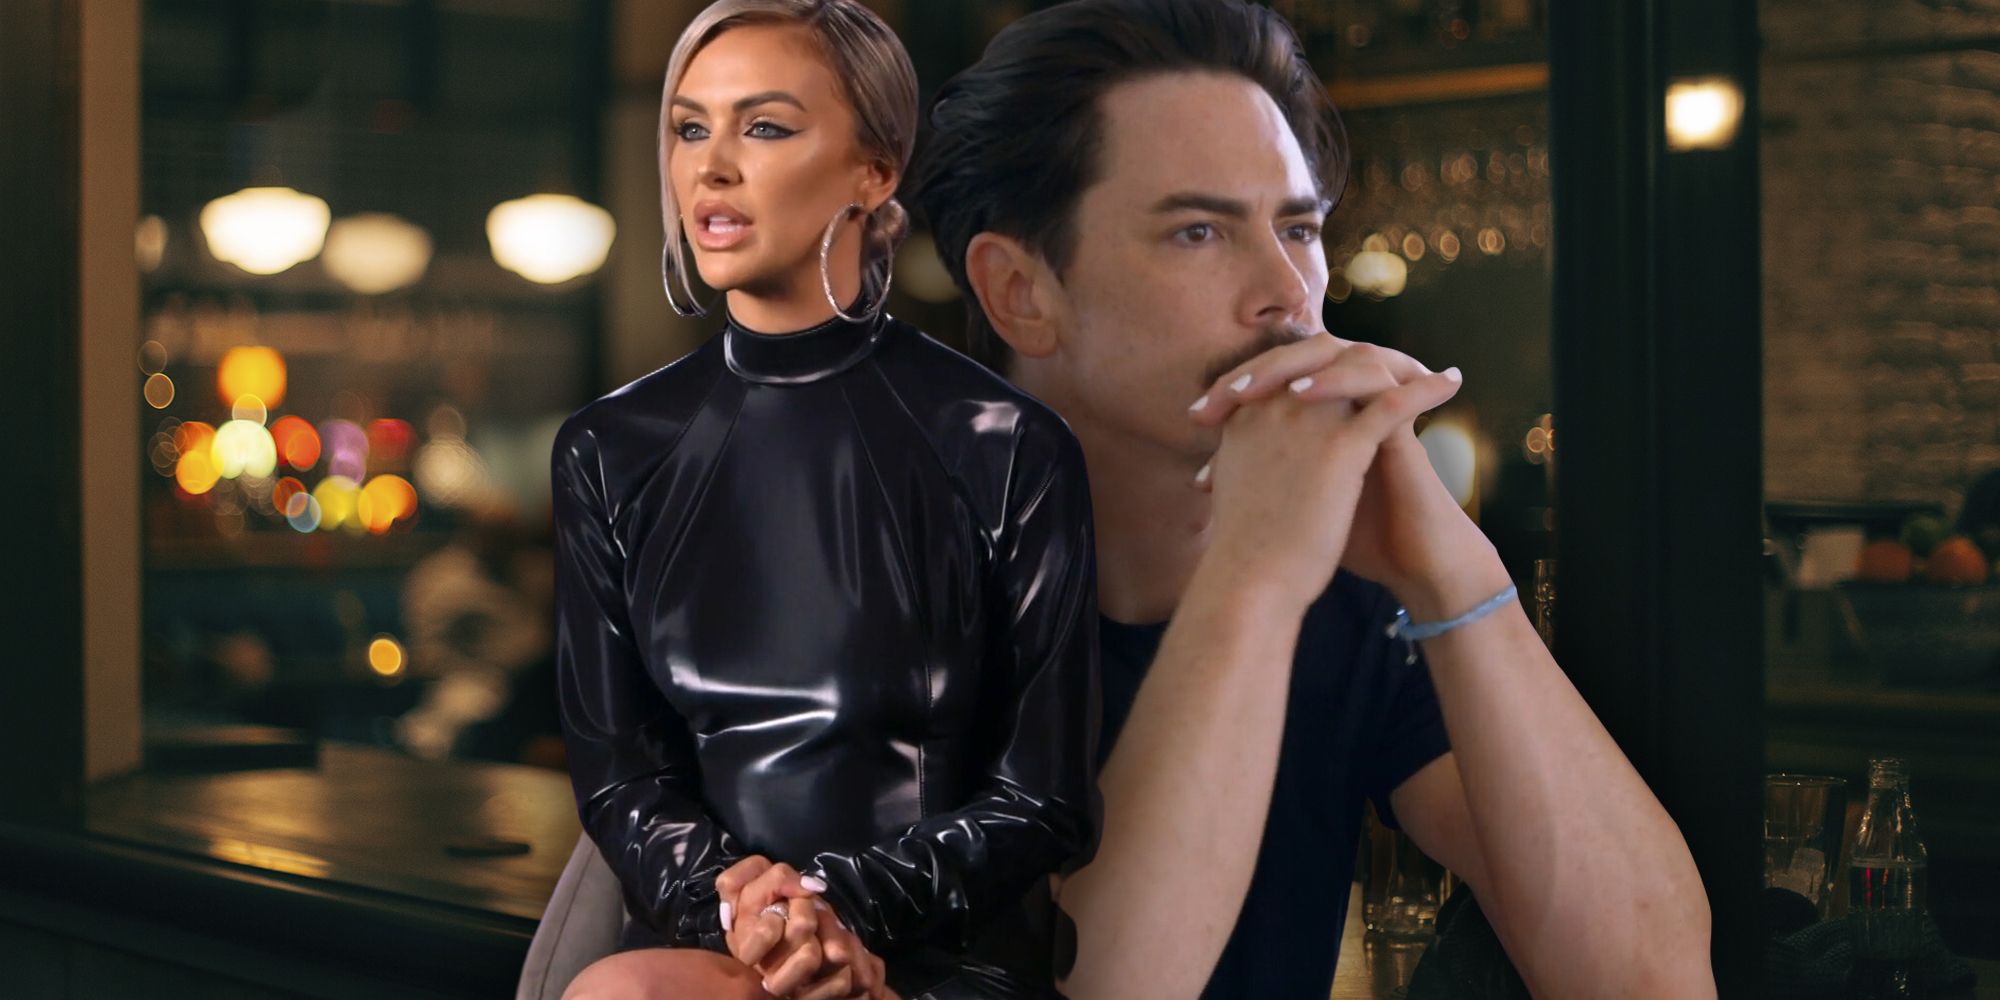 Tom Sandoval and Lala Kent from Vanderpump Rules montage of lala in black dress and tom looking pensive